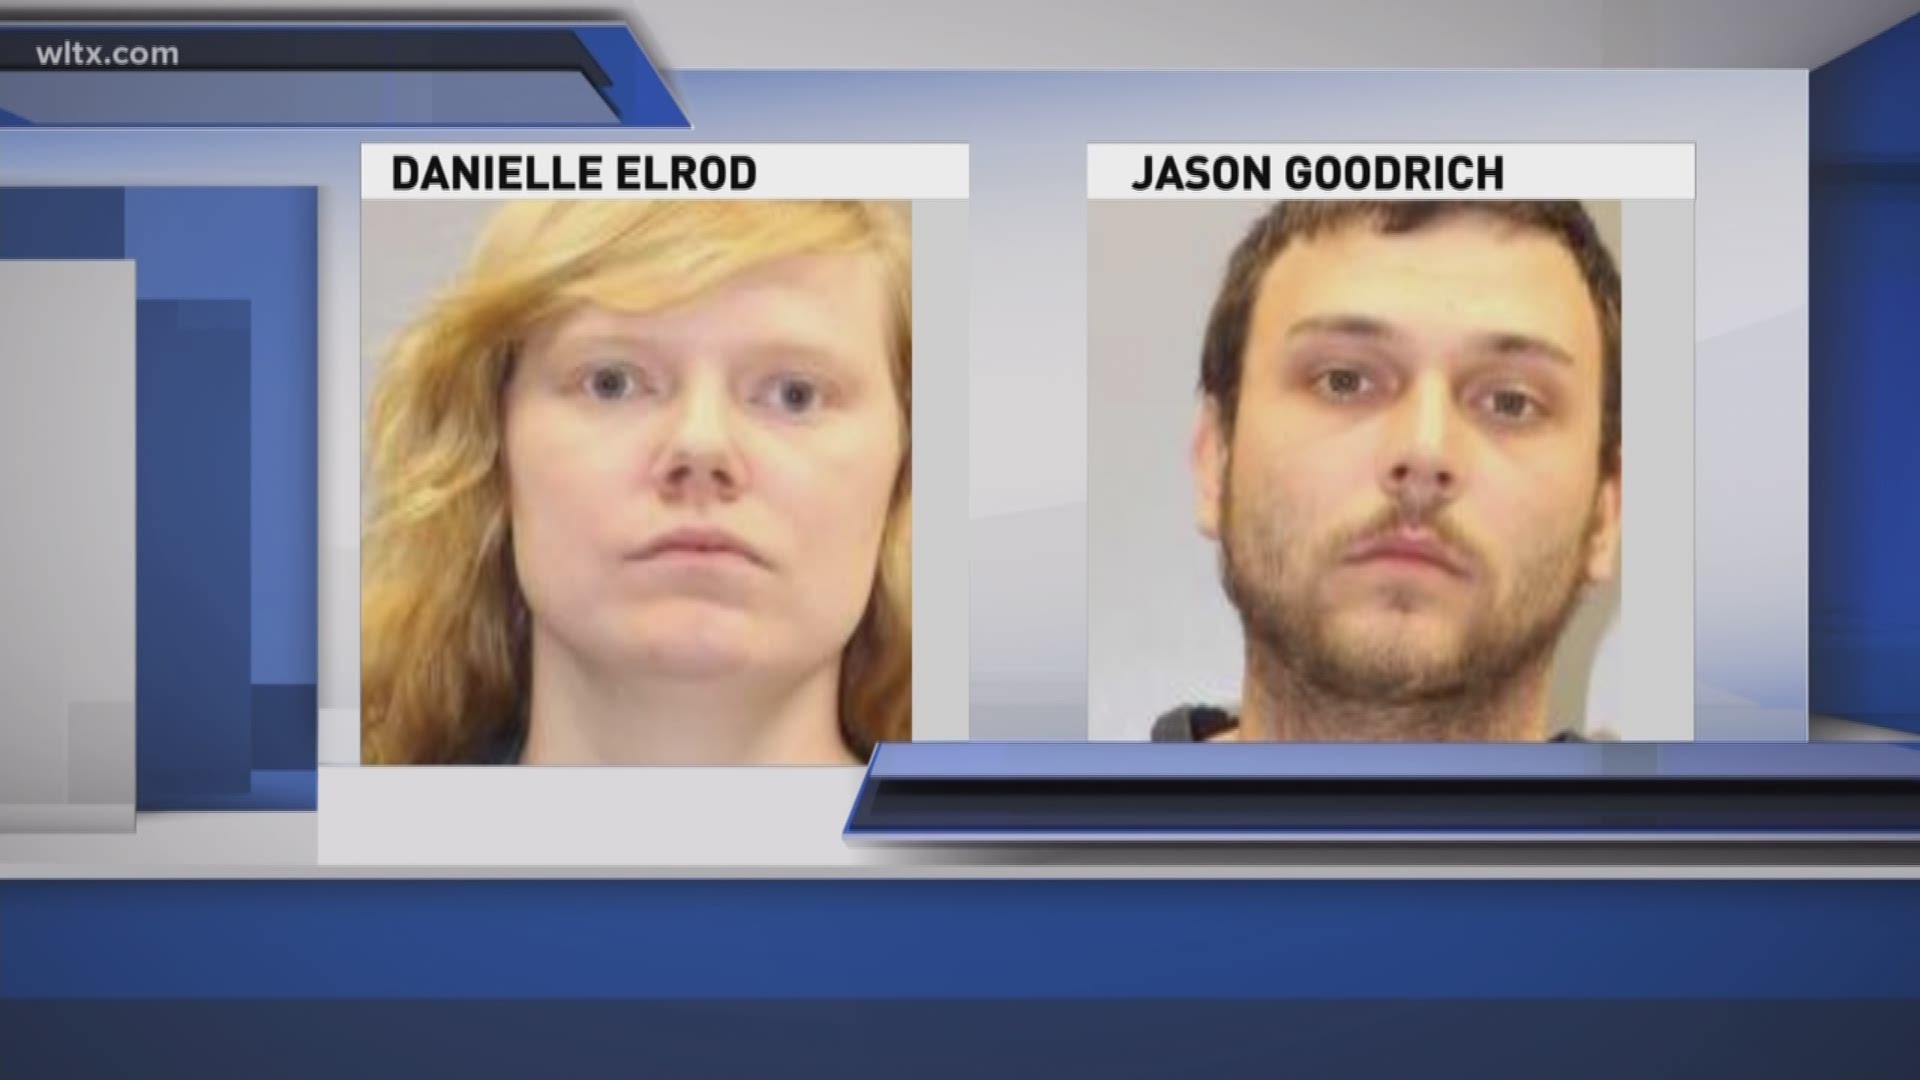 ACCORDING TO RICHLAND DEPUTIES....26 YEAR OLD DANIELLE ELROD AND 26 YEAR OLD JASON GOODRICH ARE CHARGED WITH HOMICIDE BY CHILD ABUSE.